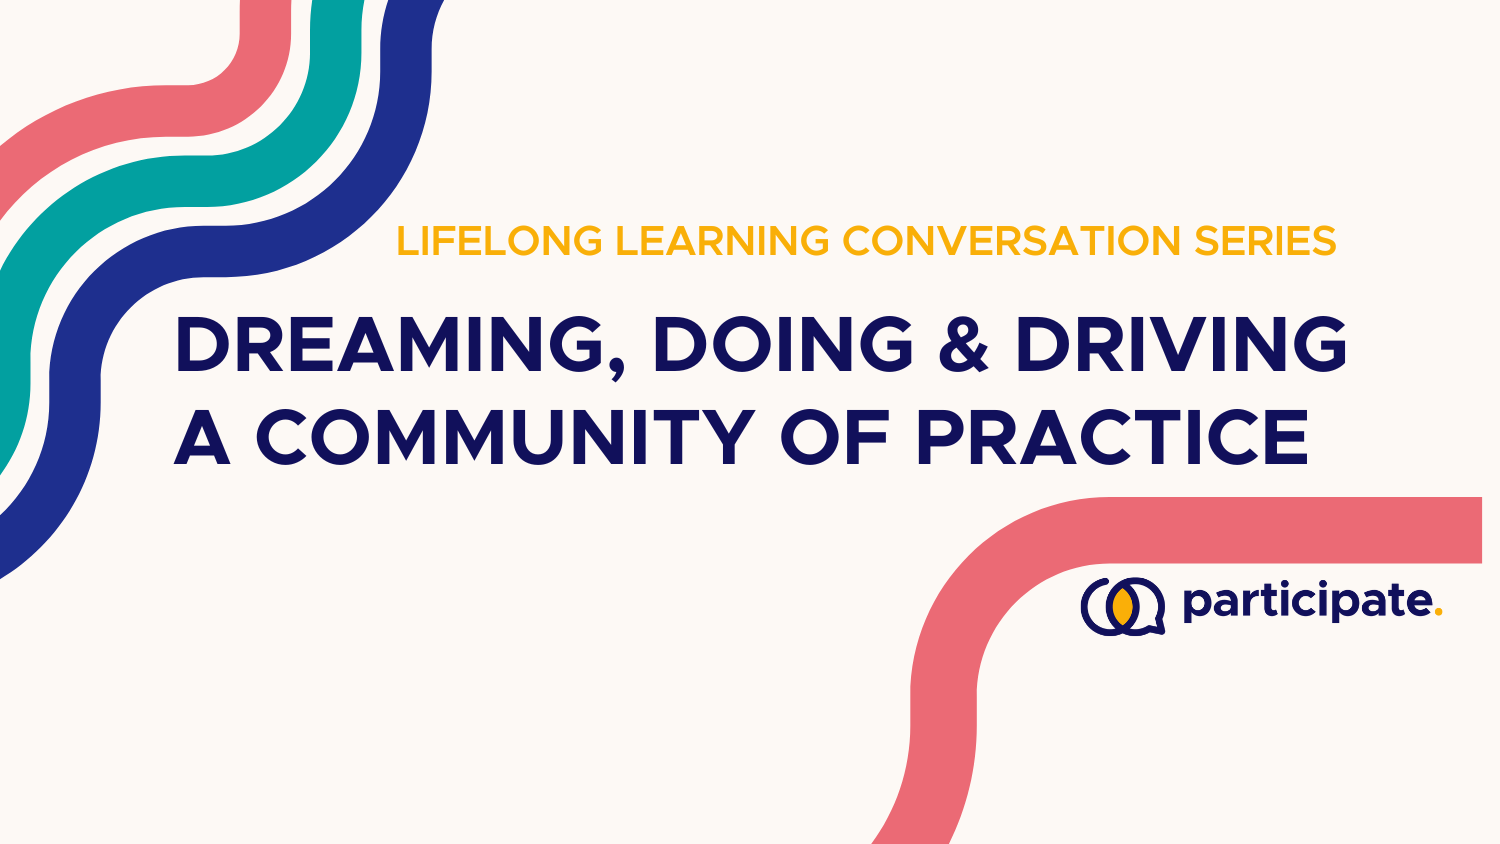 Dreaming, Doing and Driving a Community of Practice